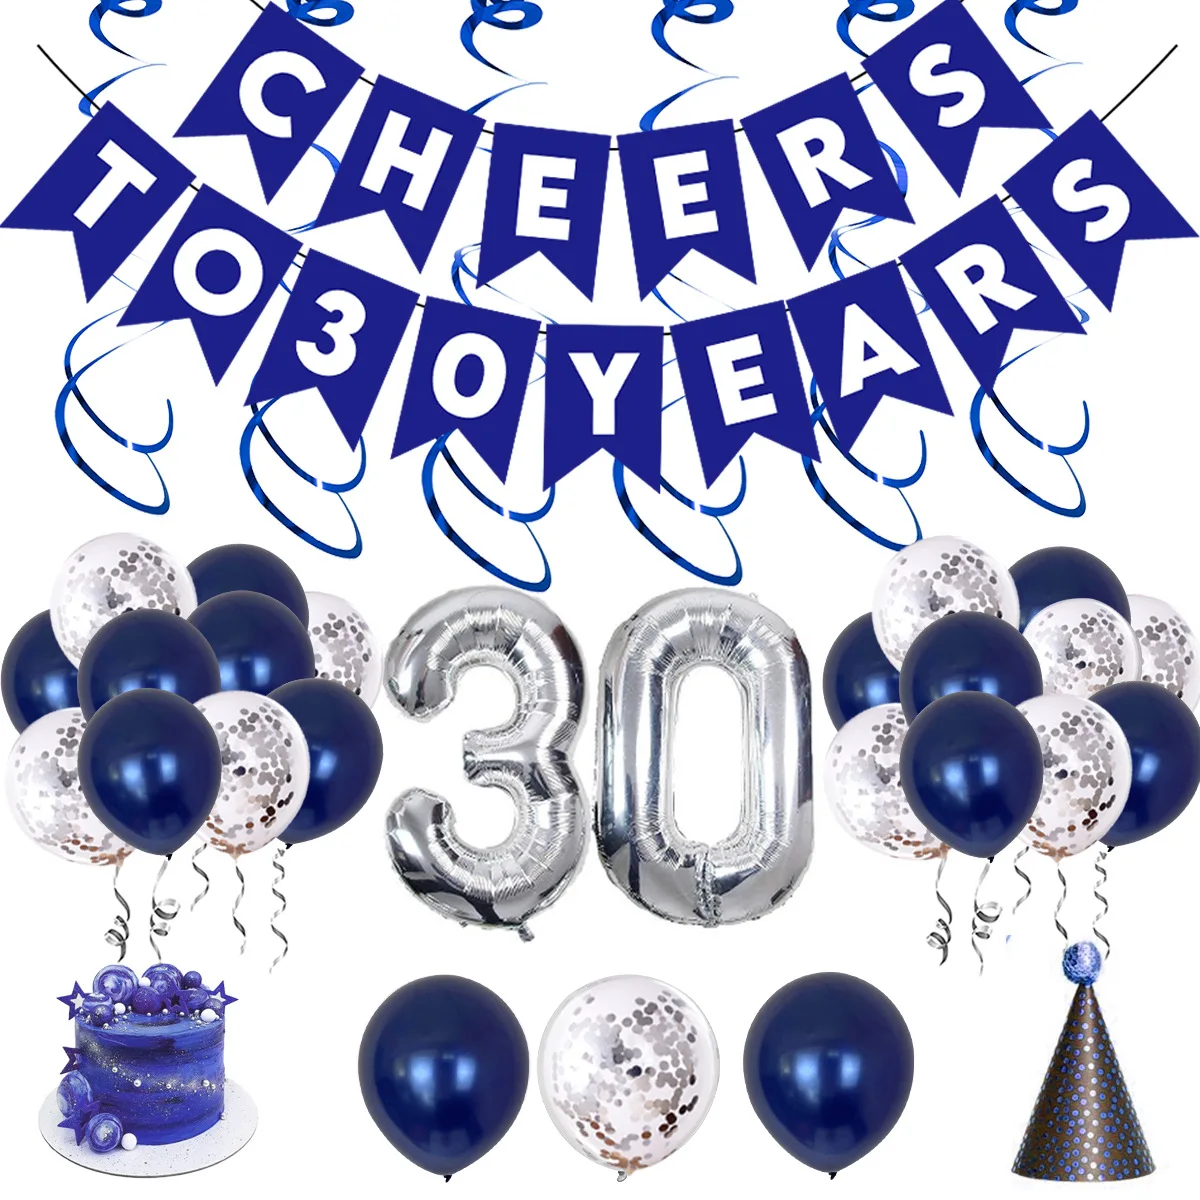 

Cheer 30 40 50 60th Banner Balloons Set 30 40 50 60 Years Old Baloon Happy Birthday Party Decor Ballons For 30th 40th 50th 60th